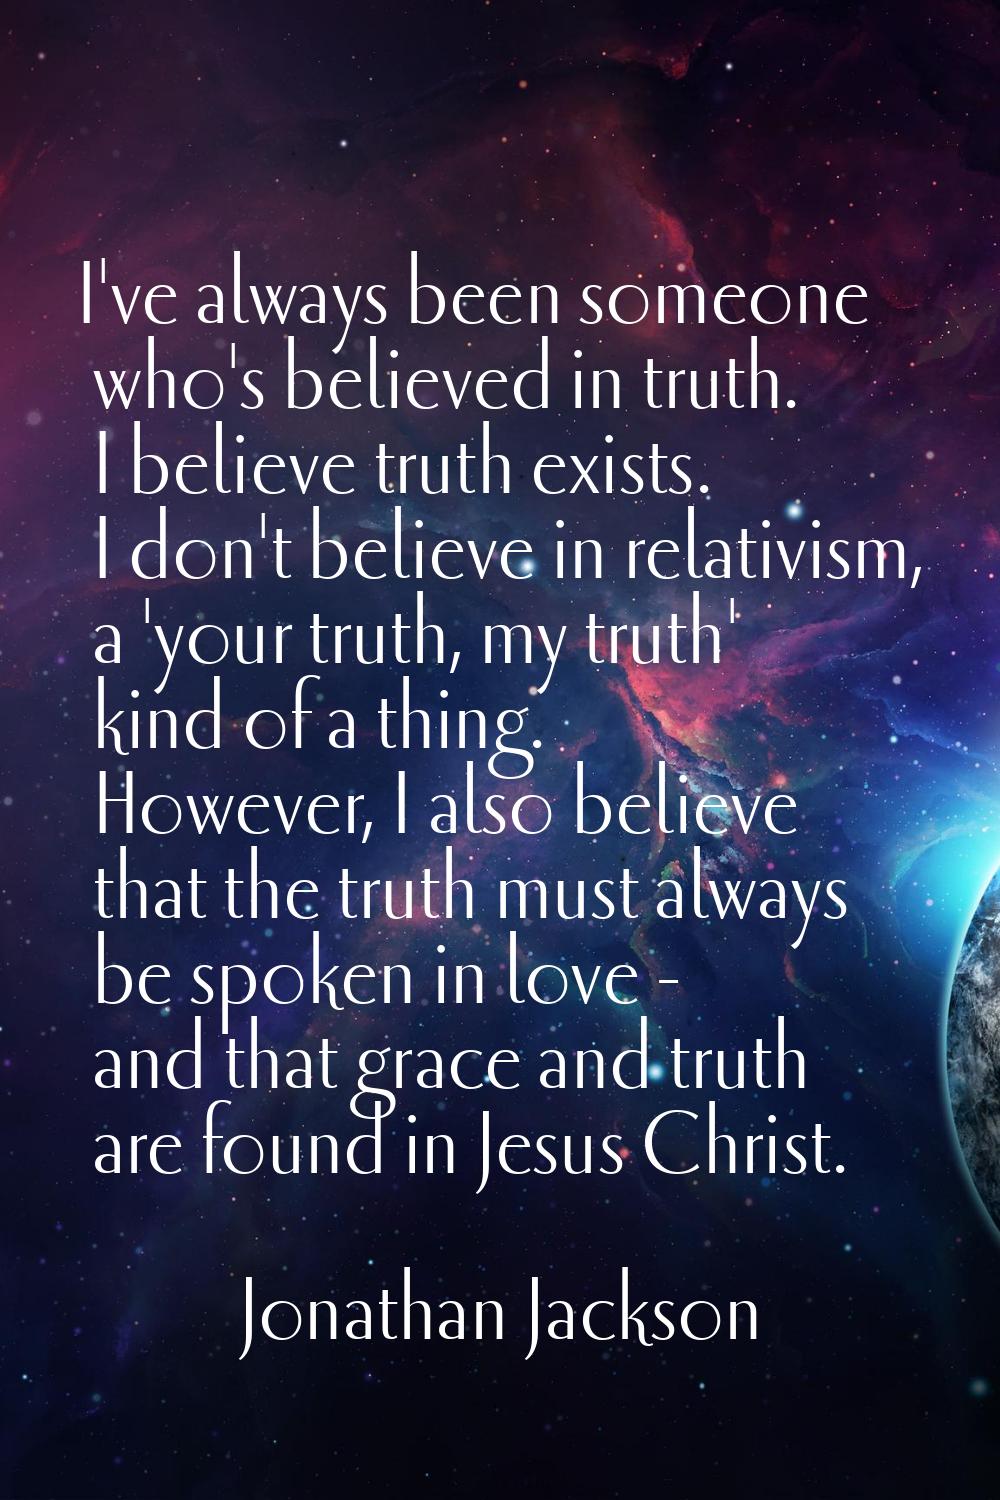 I've always been someone who's believed in truth. I believe truth exists. I don't believe in relati